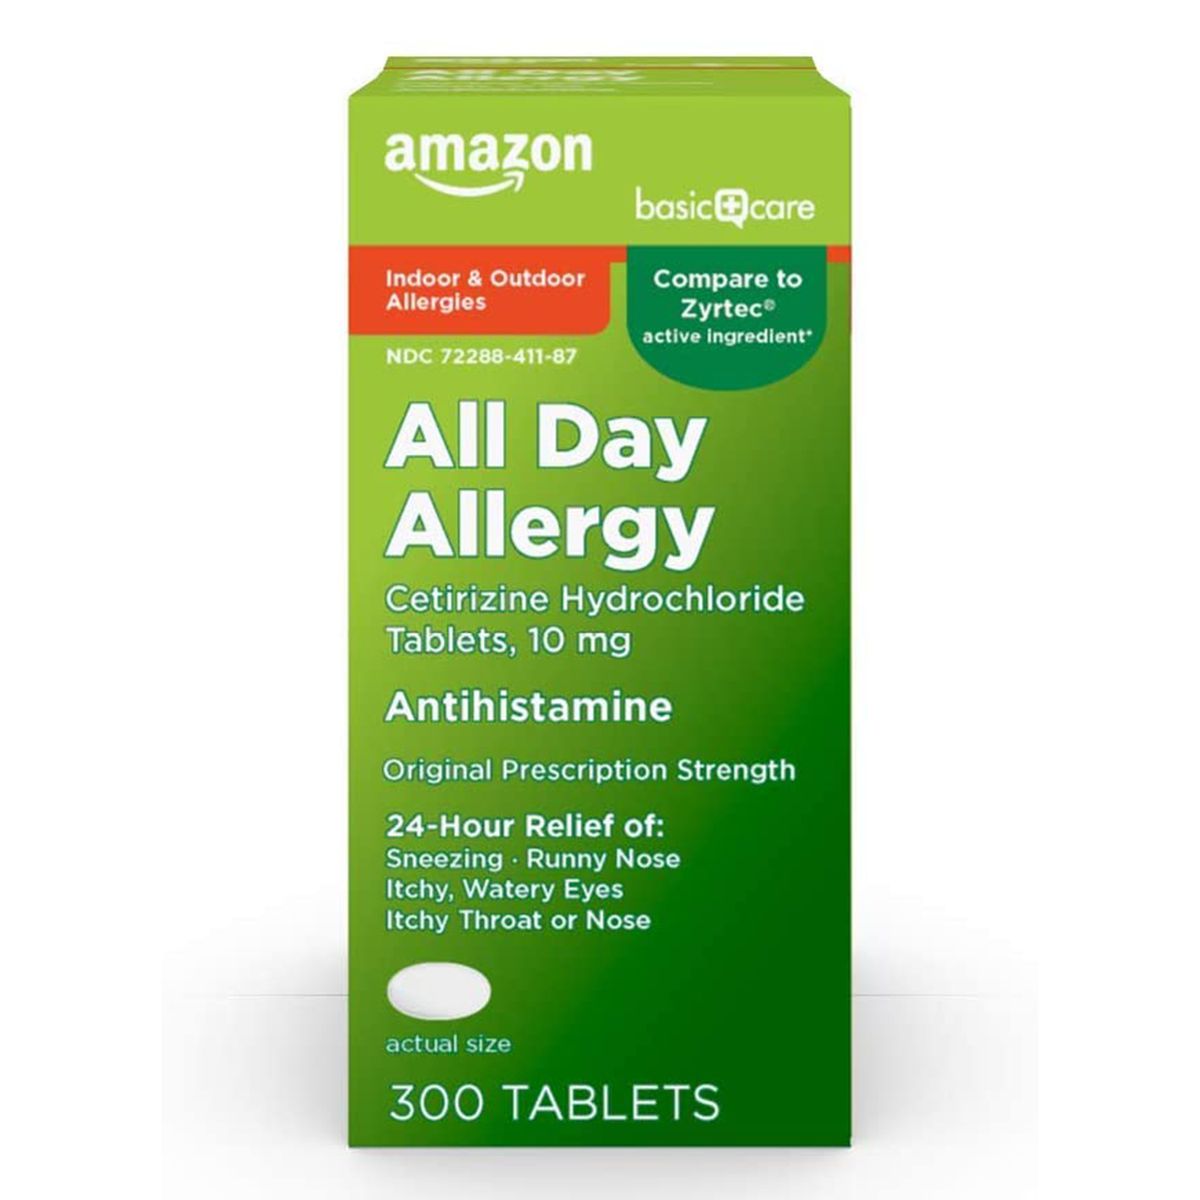 Amazon Basic Care All Day Allergy